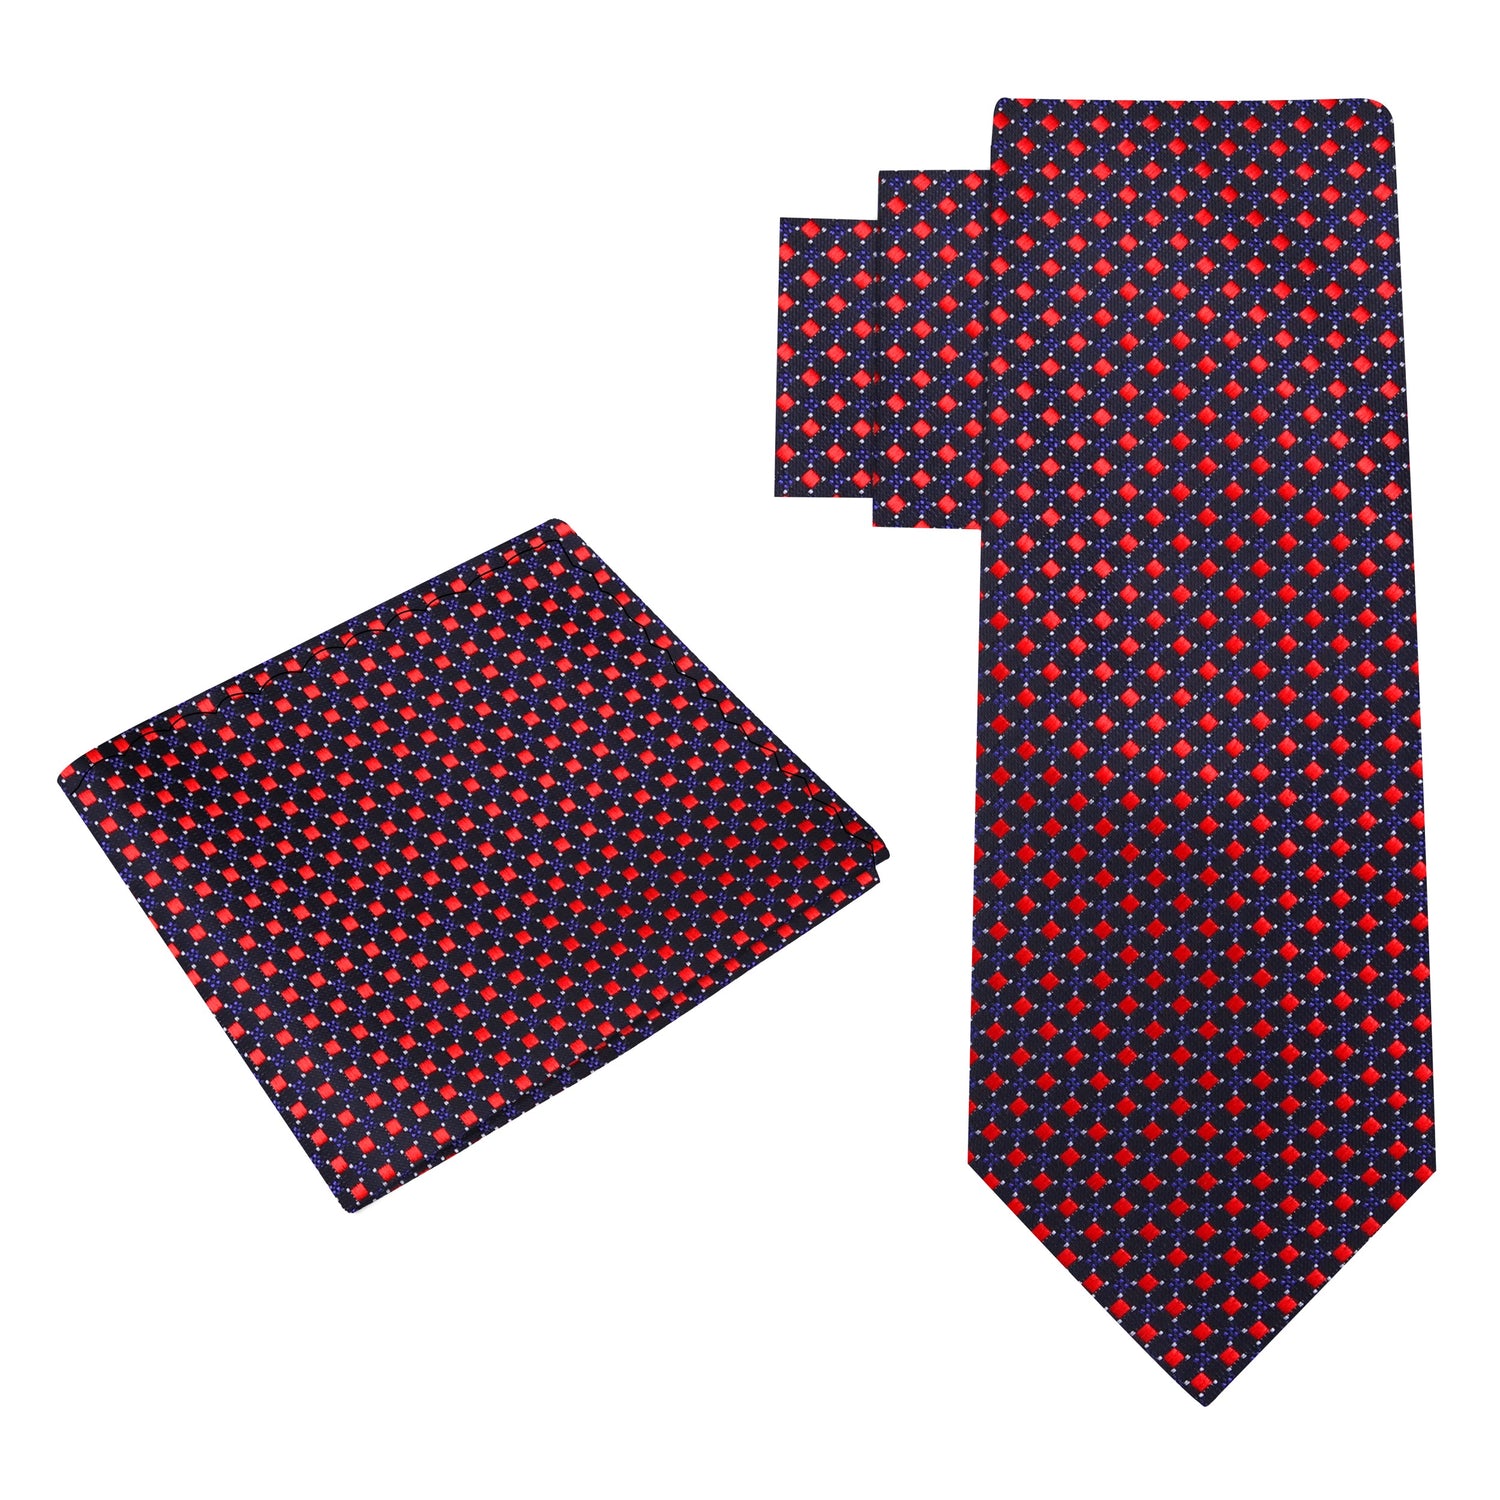 Alt View: Black, Red and Purple Check Tie and Pocket Square